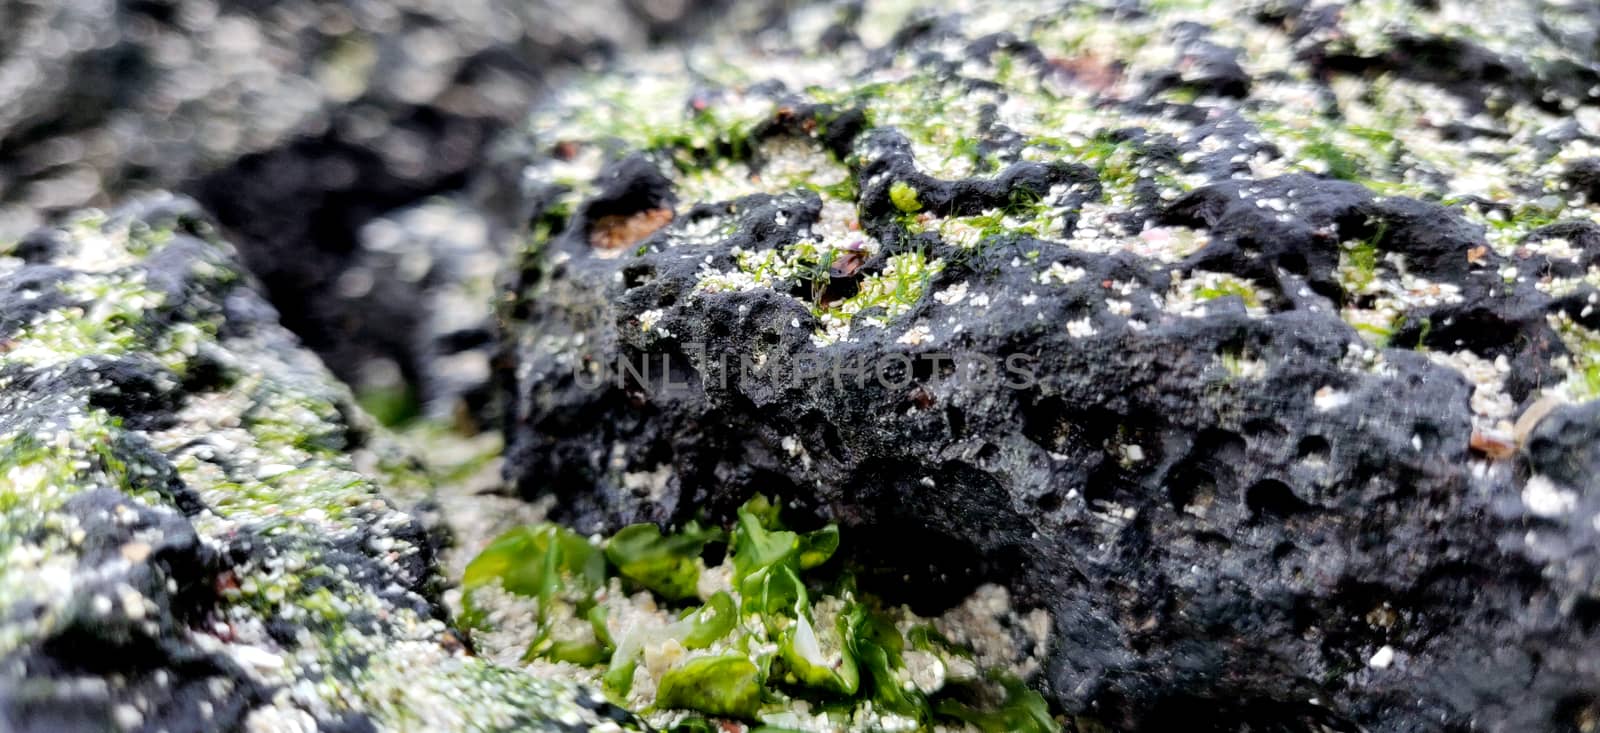 Macro shot of volcanic black rock and green algae on the hyeopjae beach while in vacation in jeju island, south korea